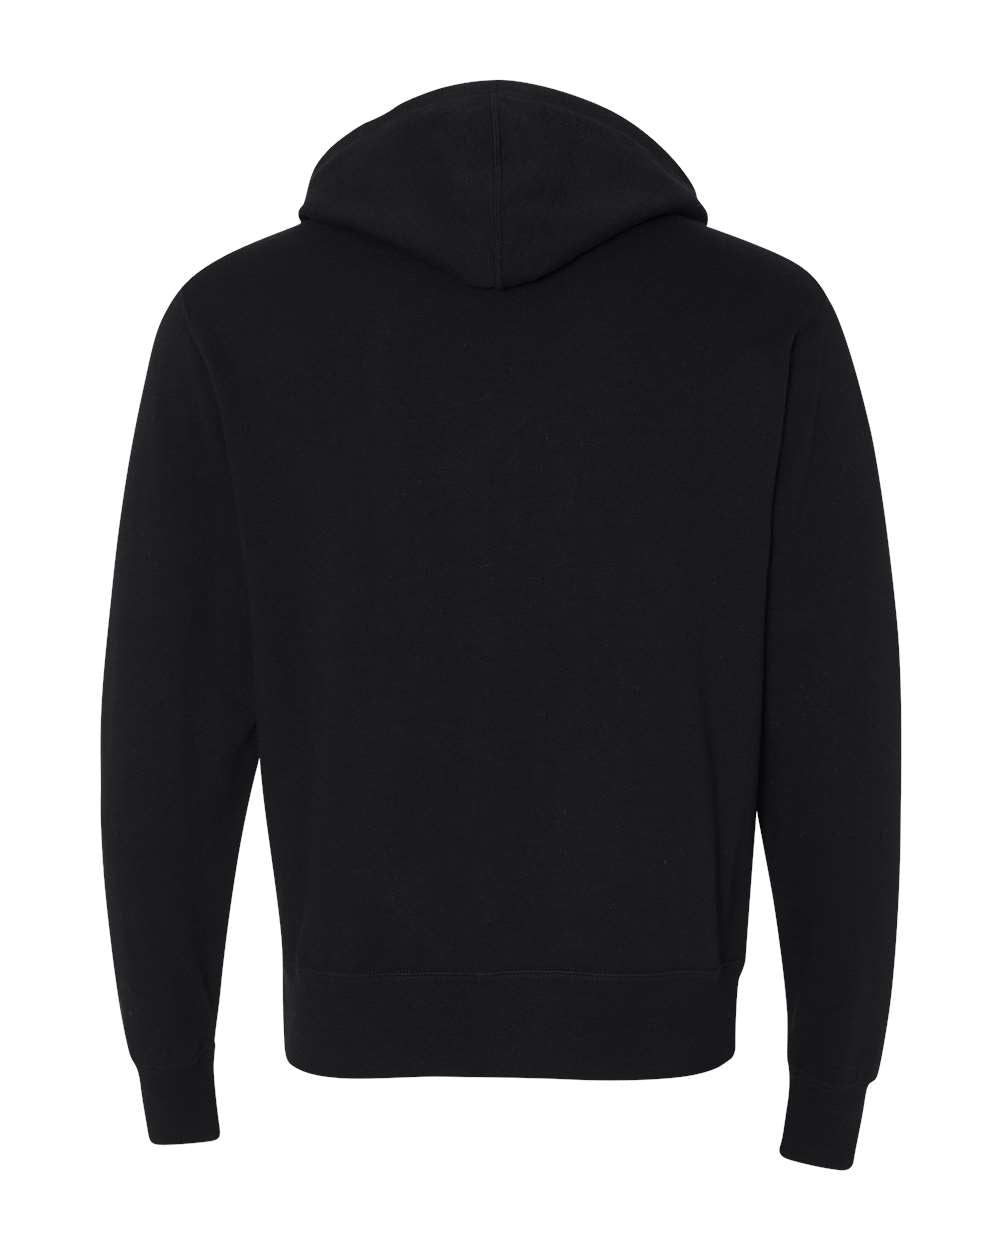 Independent Trading Co. - Heathered French Terry Full-Zip Hooded Sweatshirt - PRM90HTZ